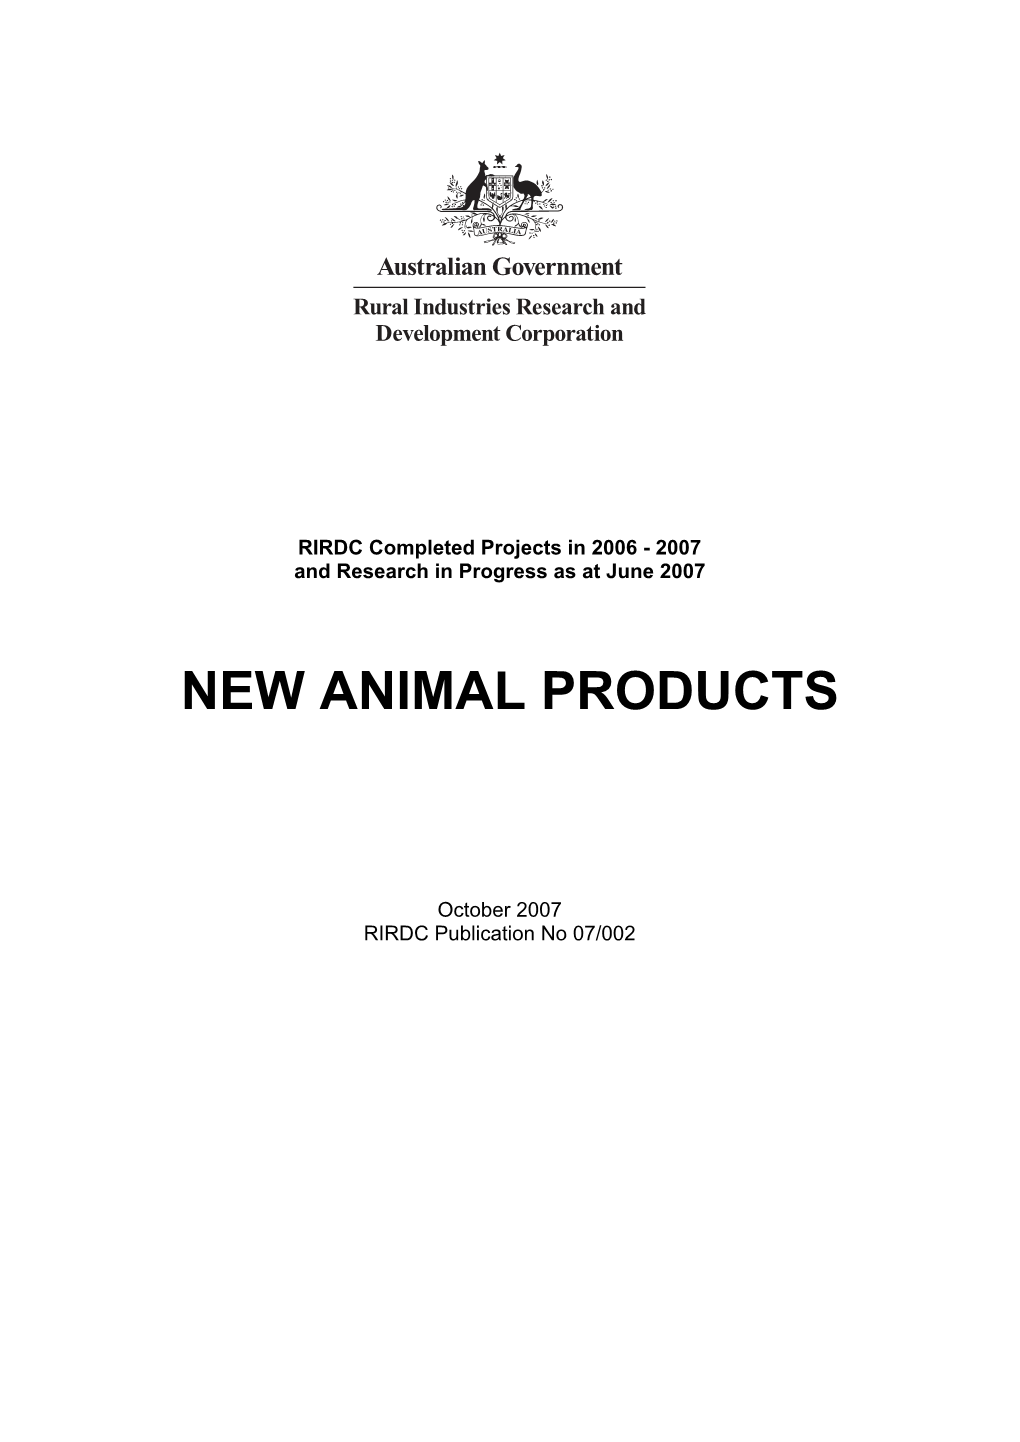 New Animal Products